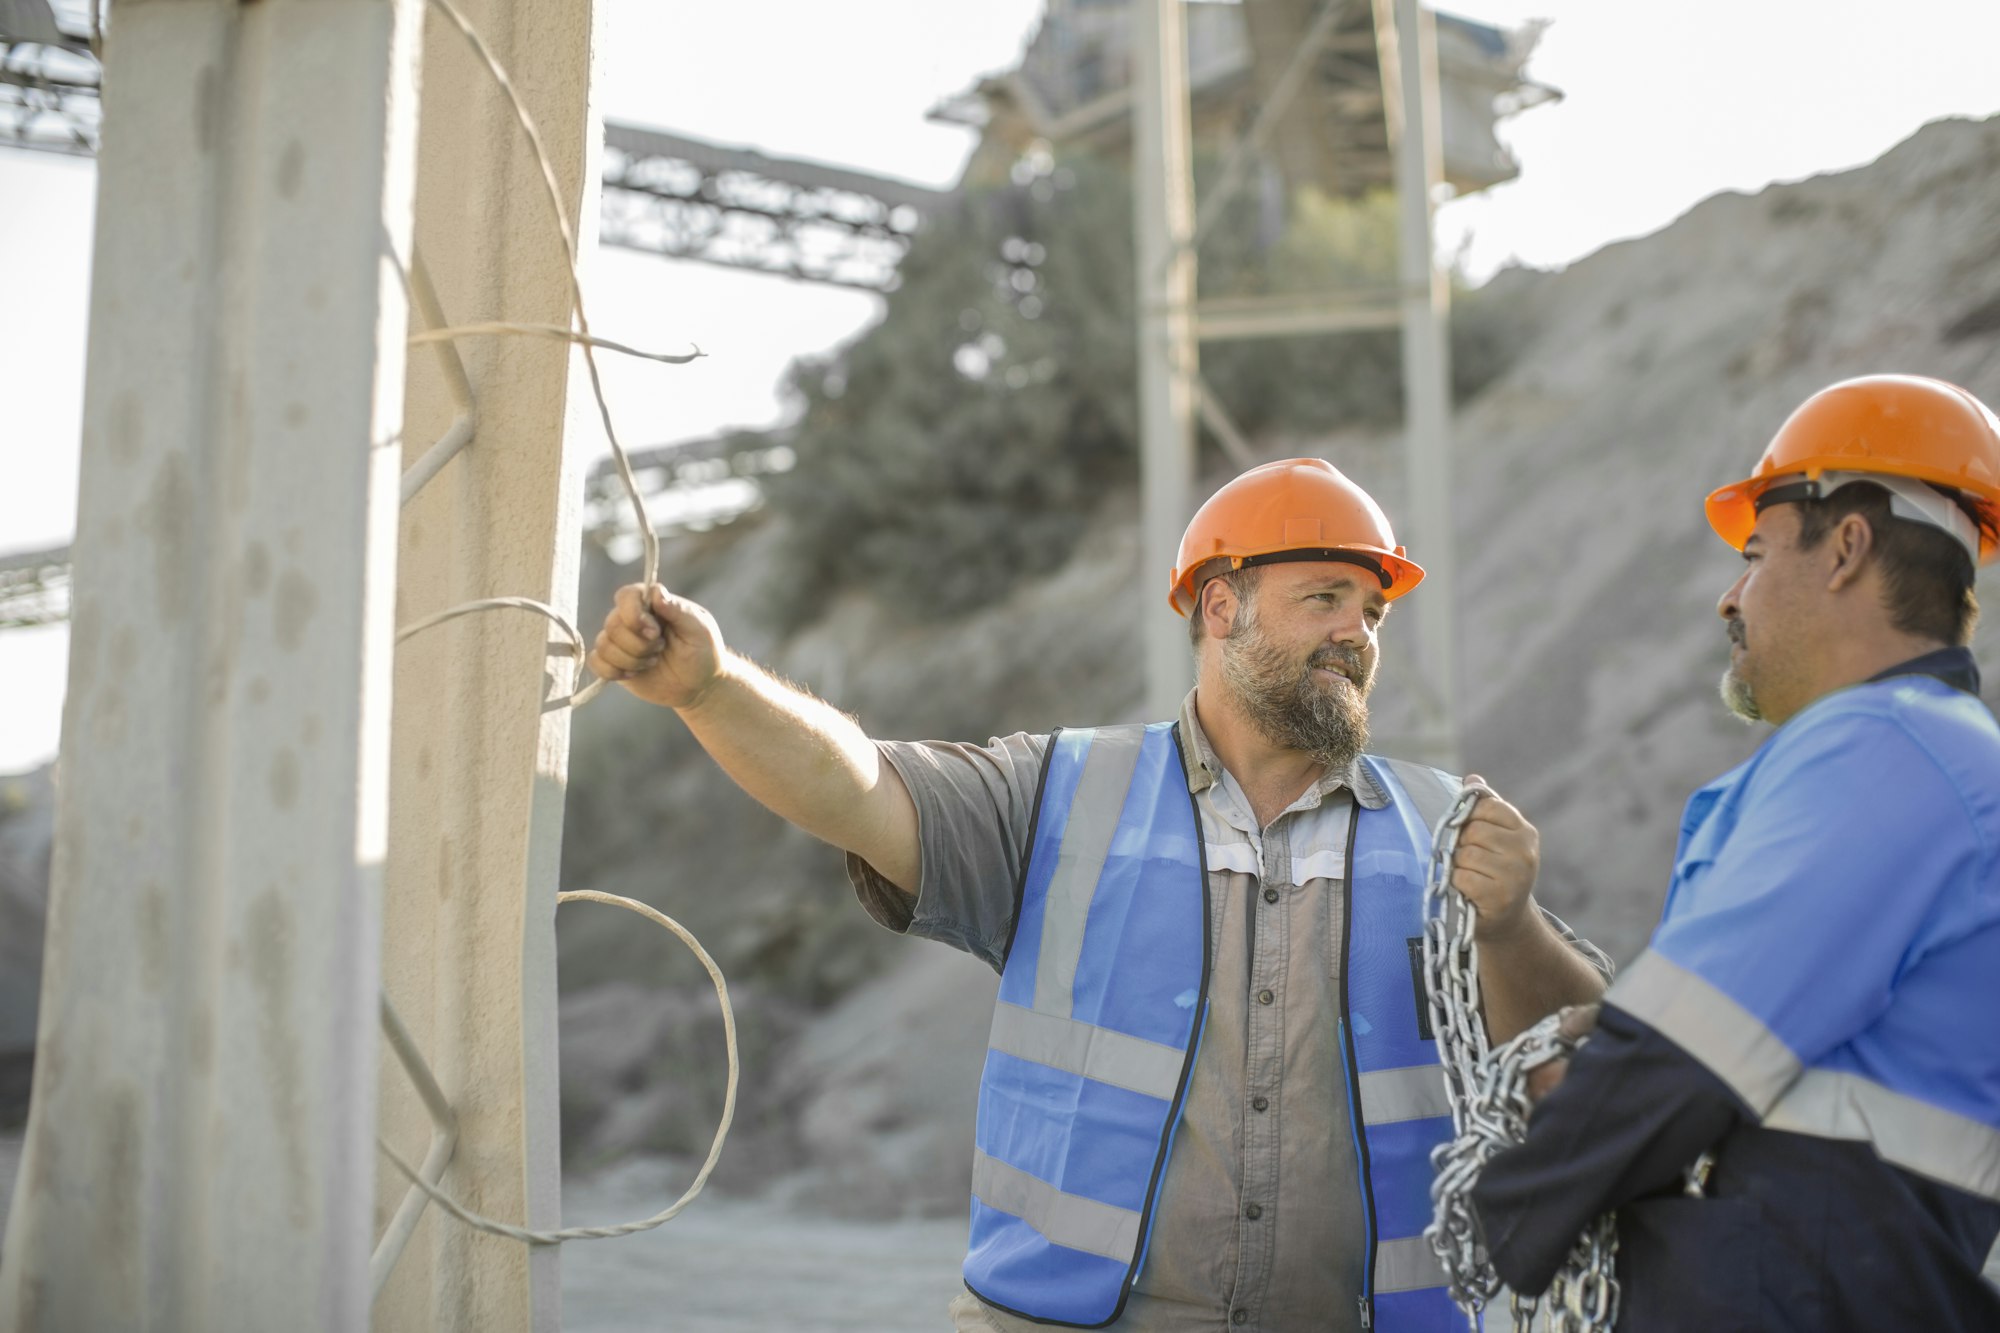 Two quarry workers in quarry, having discussion